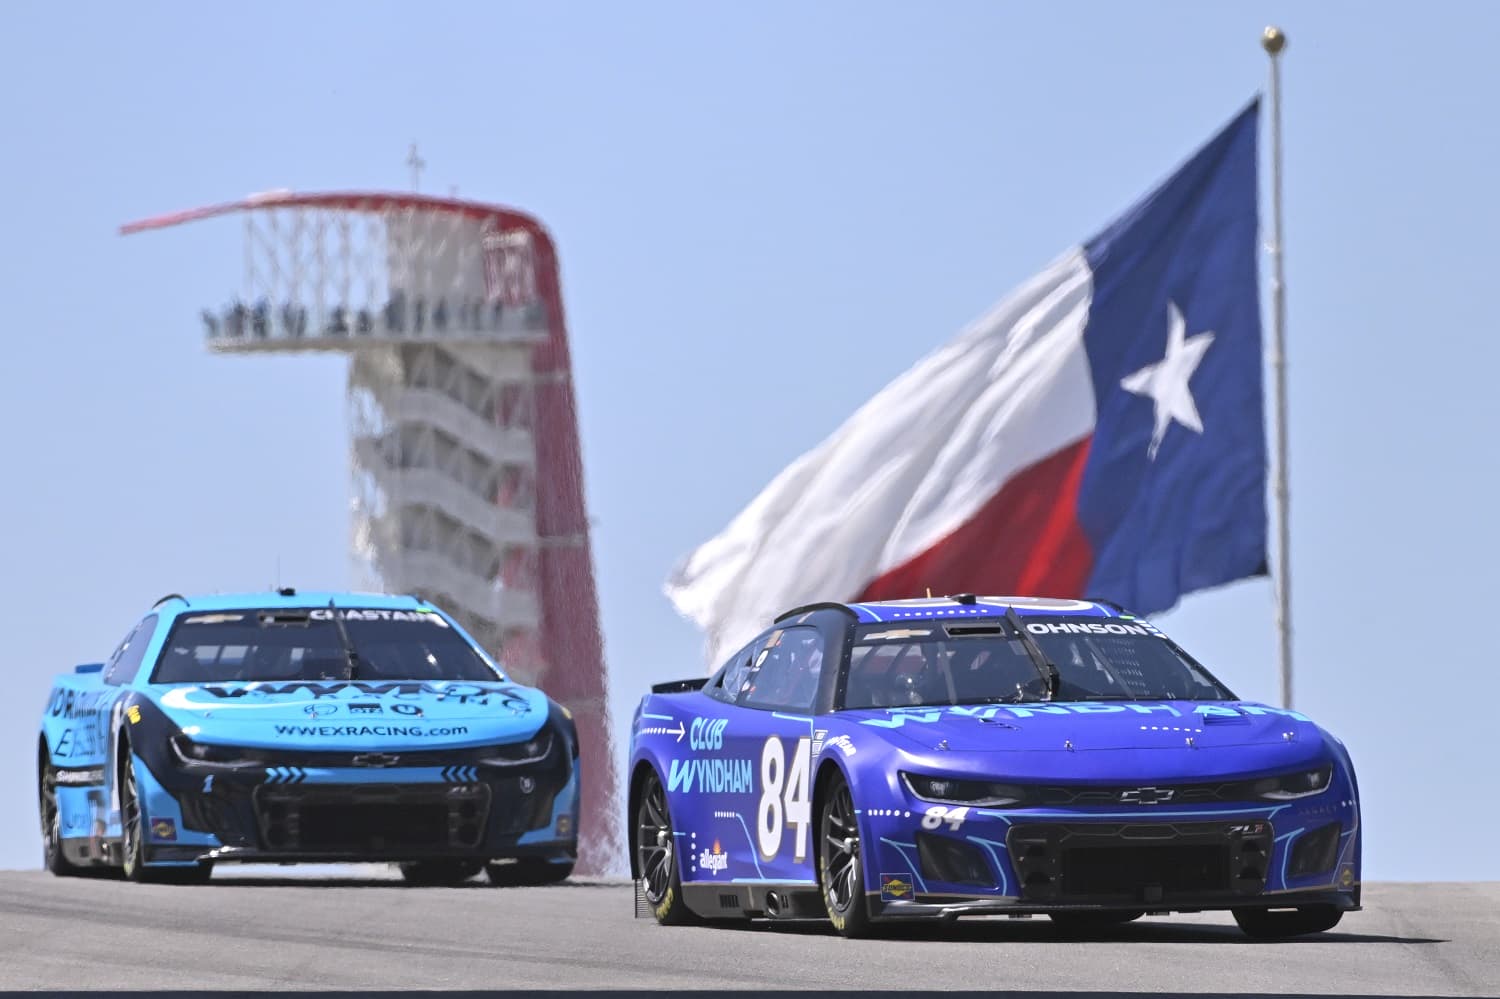 Jimmie Johnson and Ross Chastain drive during practice for the NASCAR Cup Series EchoPark Automotive Grand Prix at Circuit of The Americas on March 24, 2023.